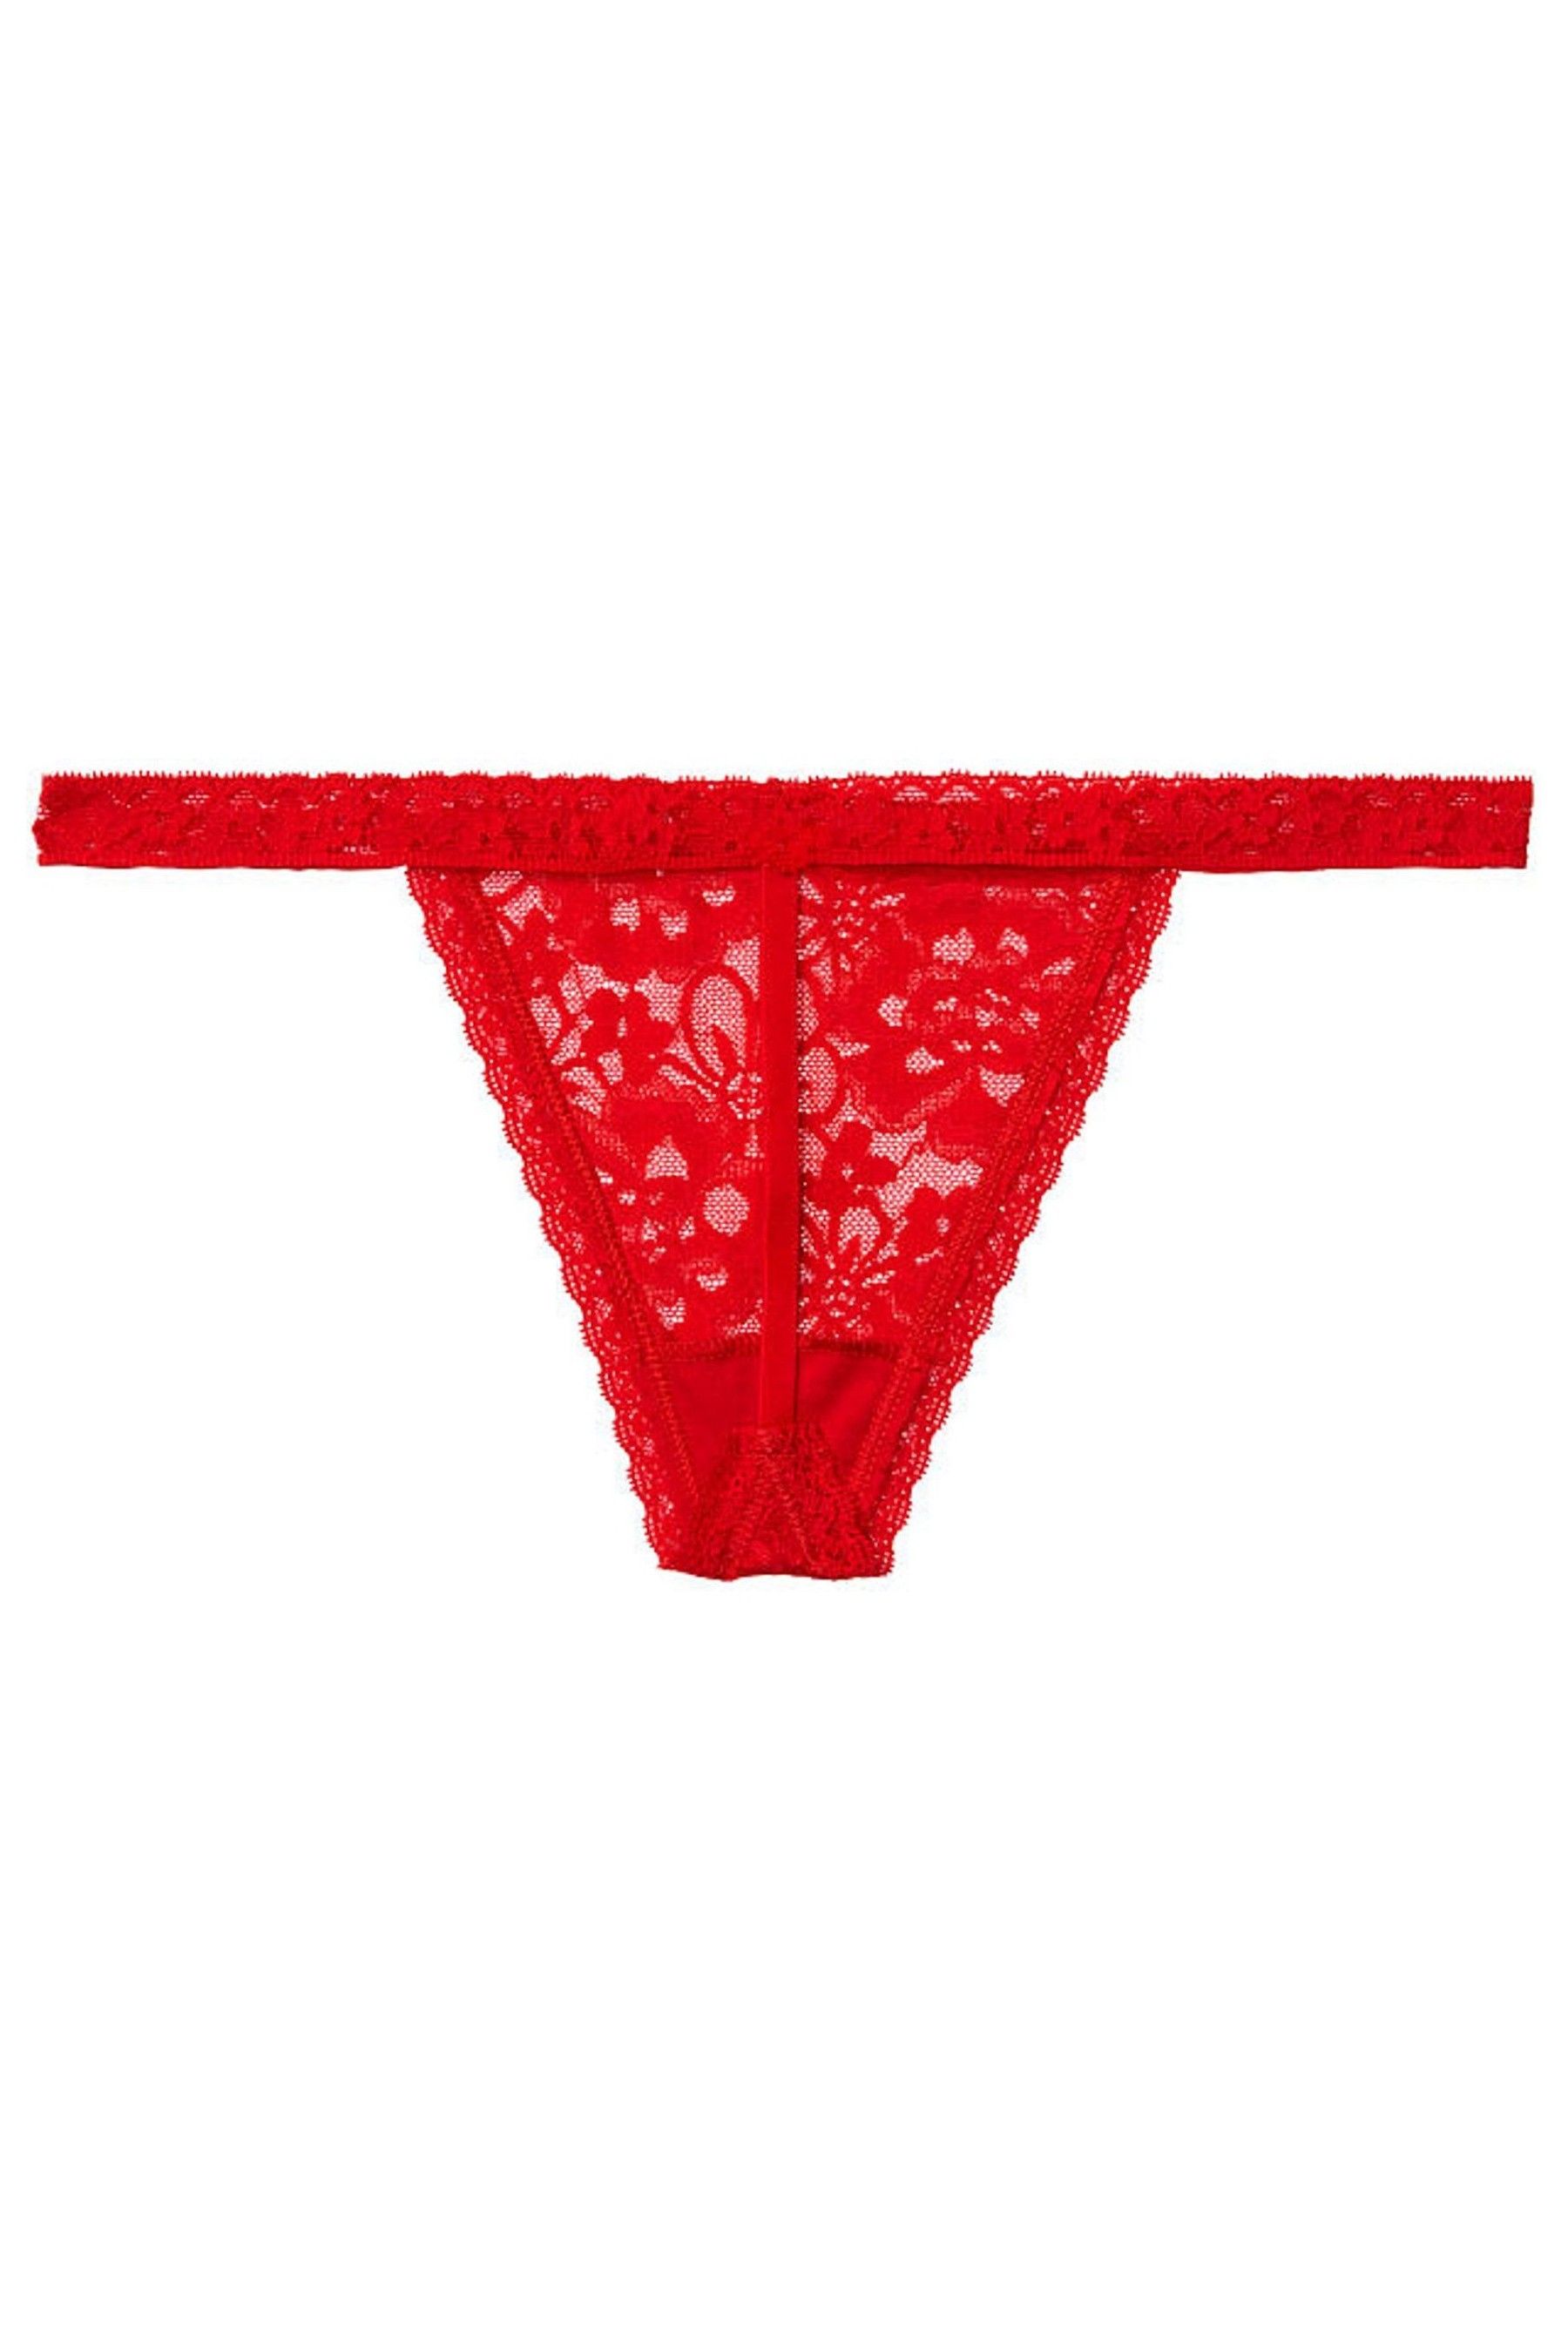 Buy Victoria's Secret Lace G String Knickers from the Victoria's Secret ...